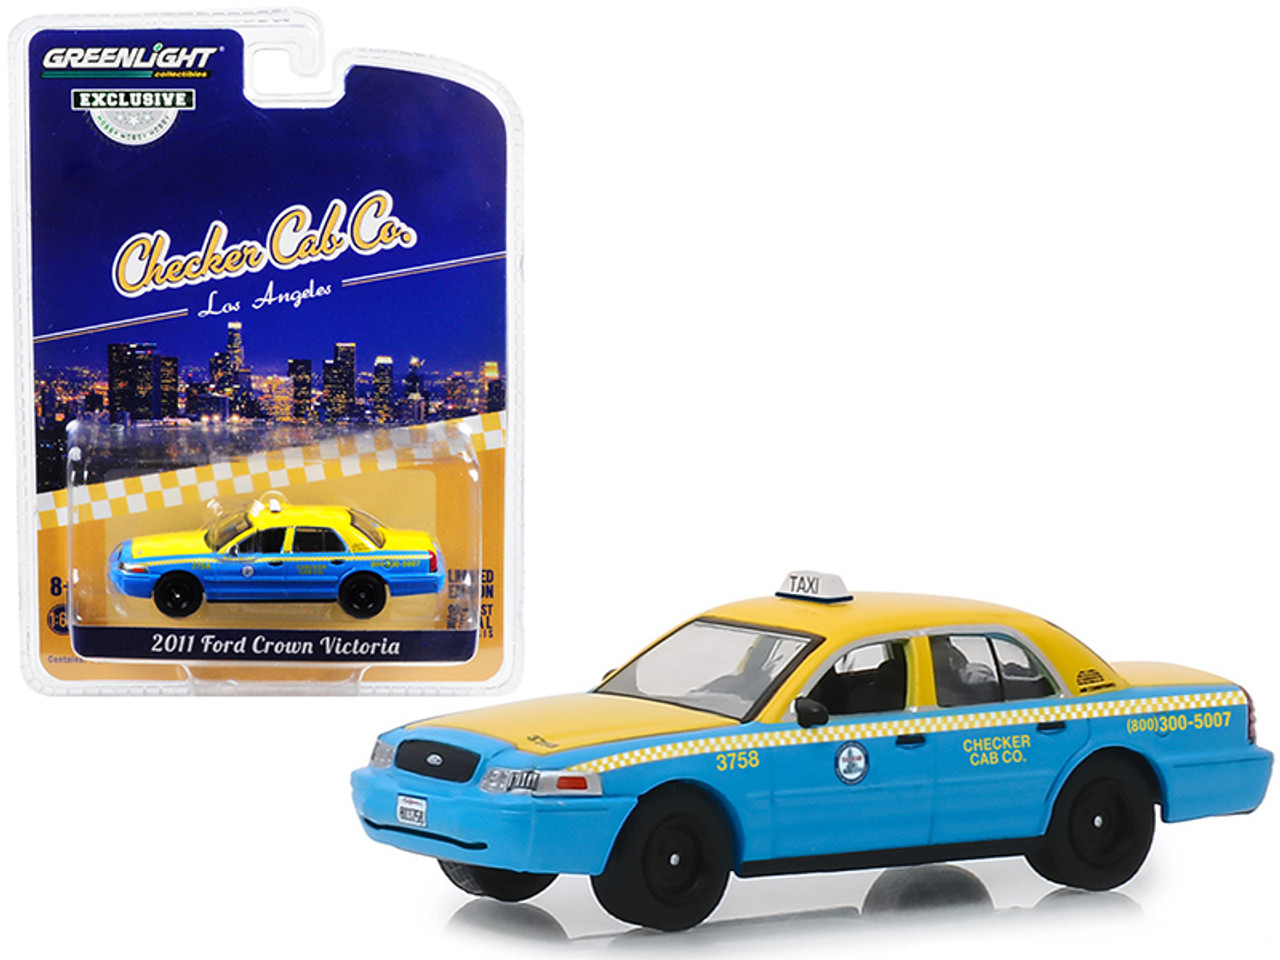 2011 Ford Crown Victoria "Checker Cab Co." Taxi City of Los Angeles, California 1/64 Diecast Model Car by Greenlight